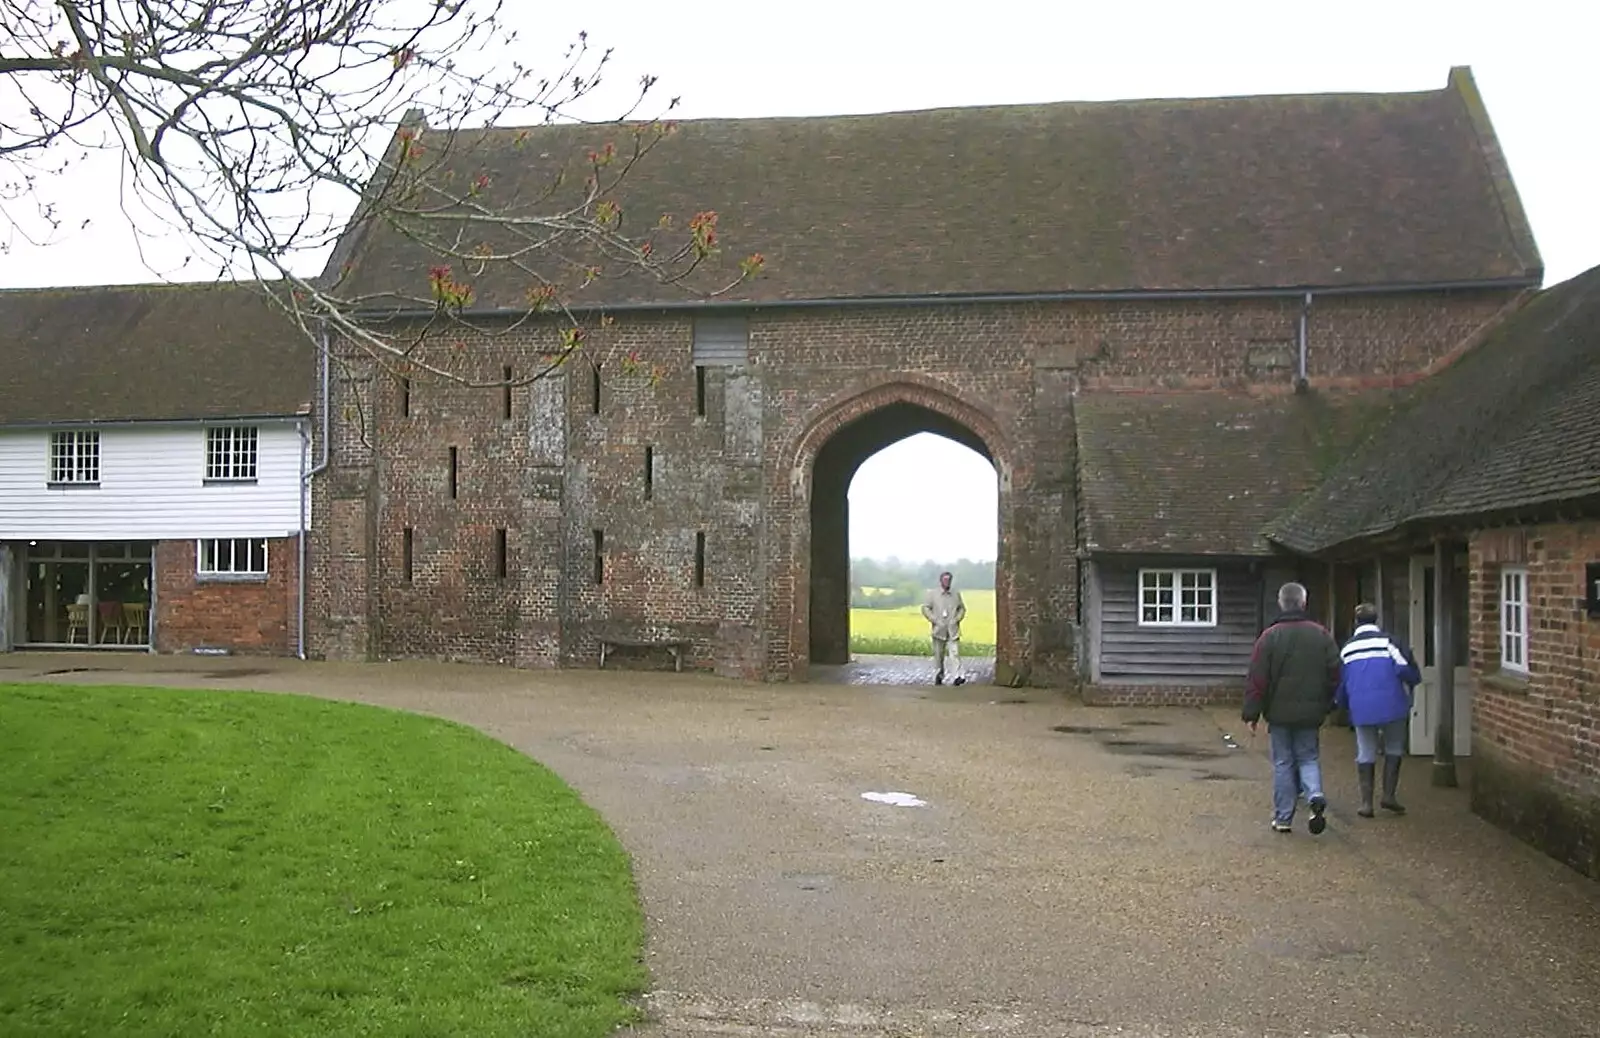 An old barn at Sissinghurst, from The BSCC Annual Bike Ride, Lenham, Kent - 8th May 2004